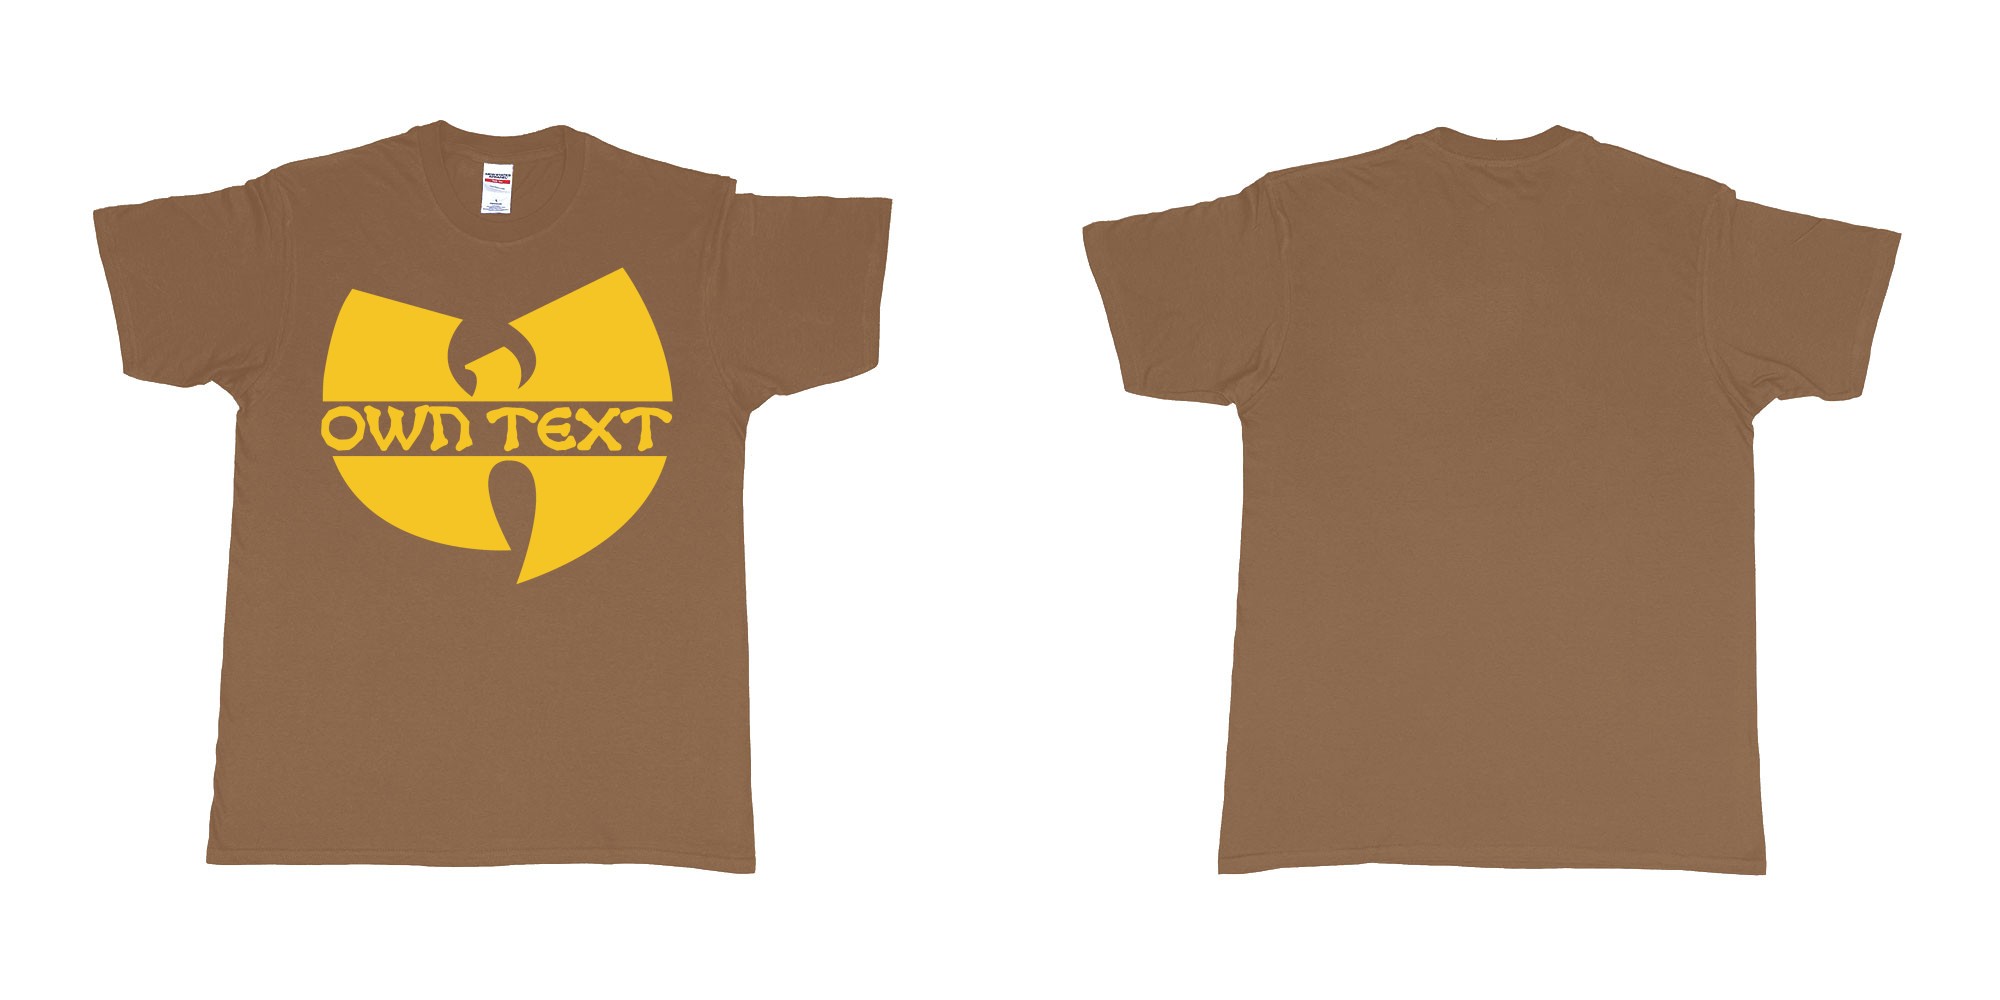 Custom tshirt design wu tang clan logo in fabric color chestnut choice your own text made in Bali by The Pirate Way